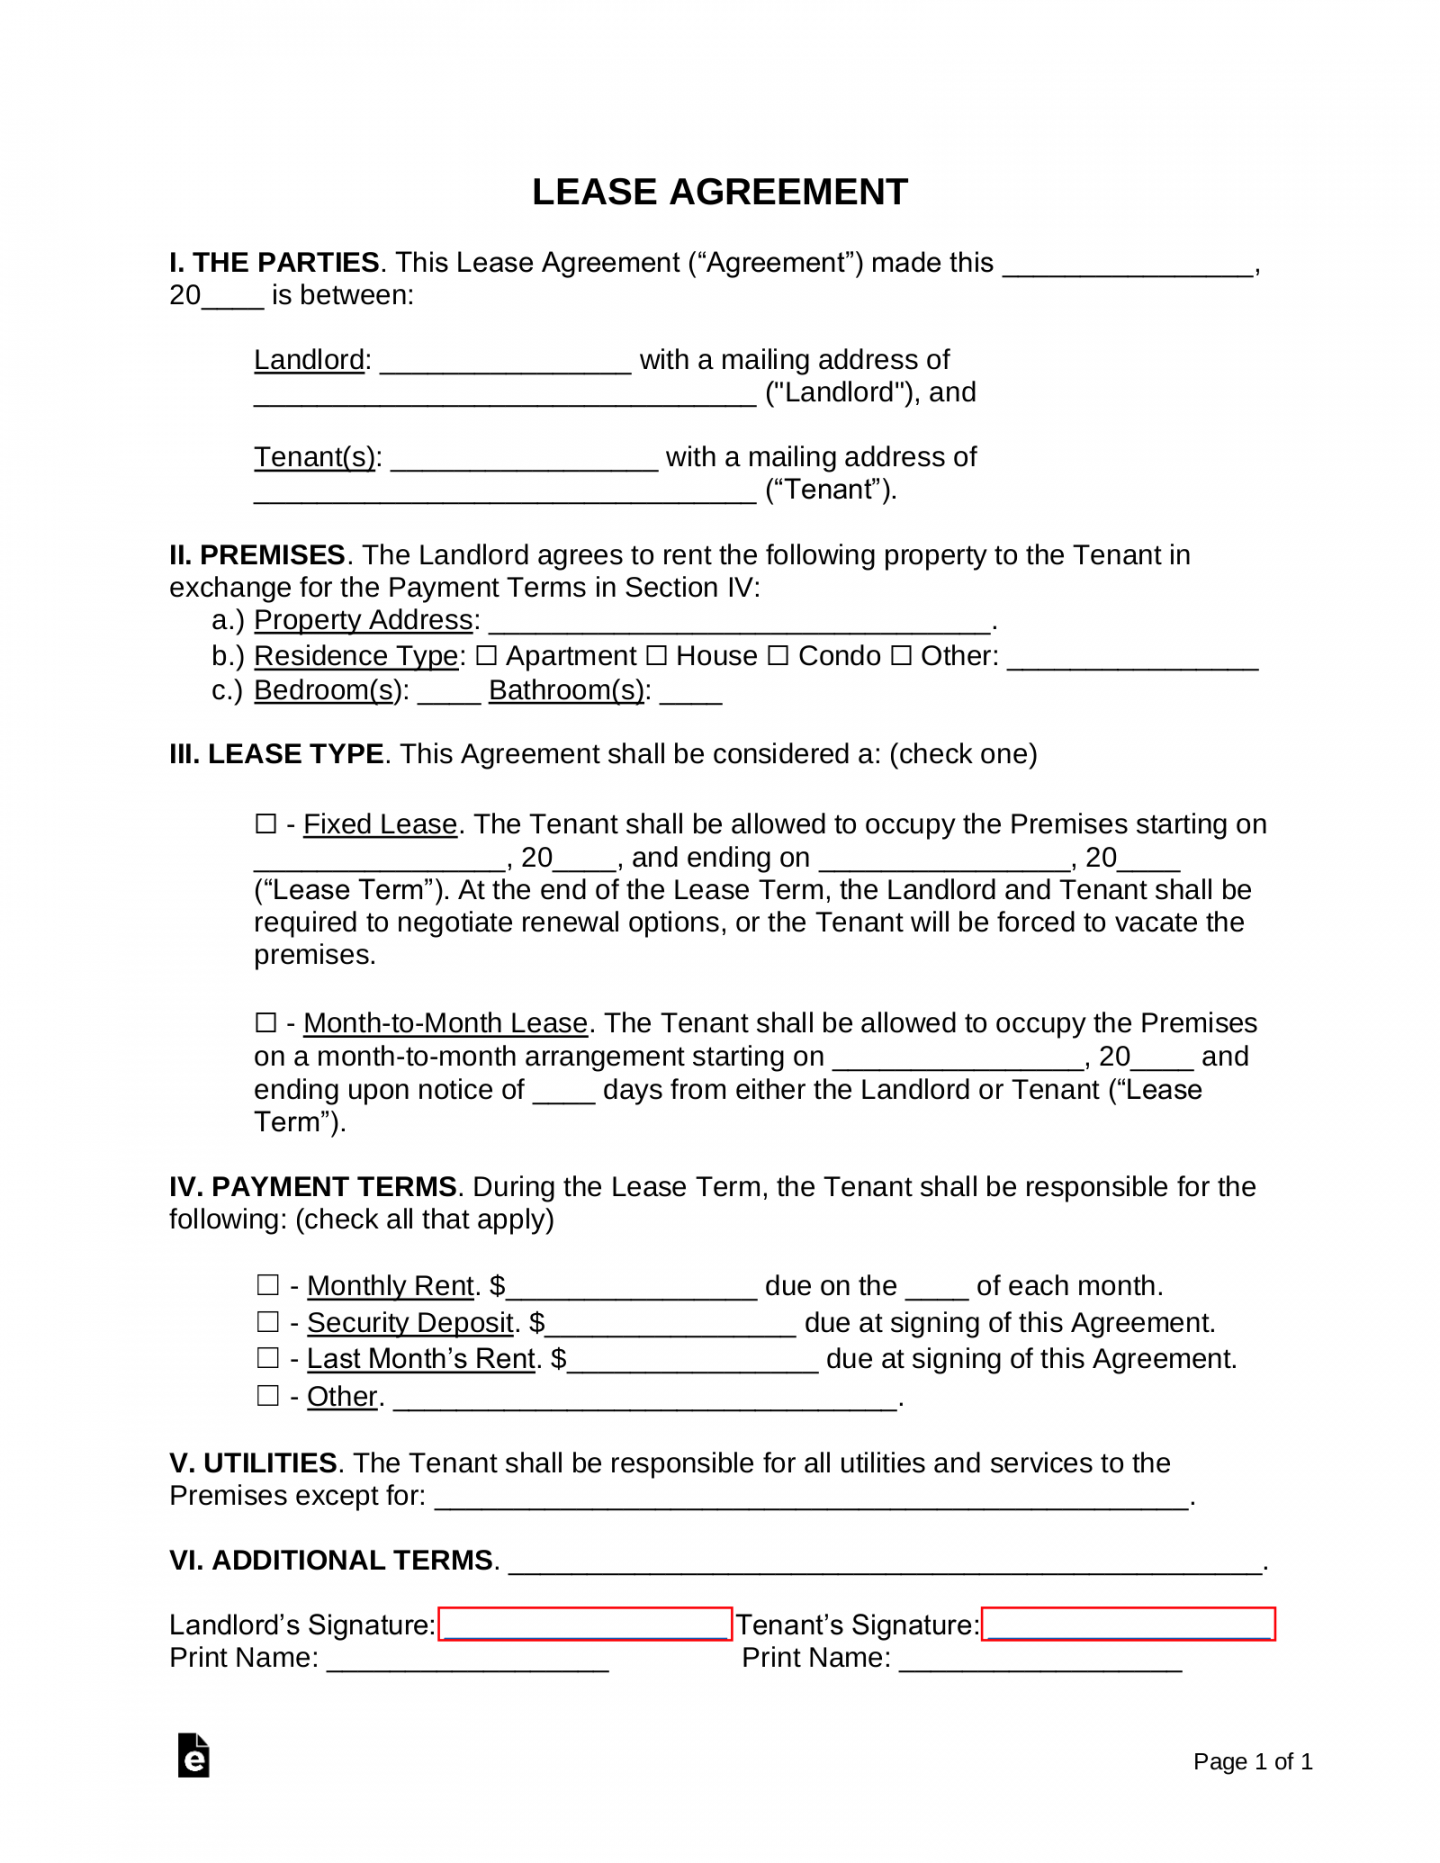 Free Printable Lease Agreement - Printable - Free Simple -Page Lease Agreement Template  Sample - PDF  Word